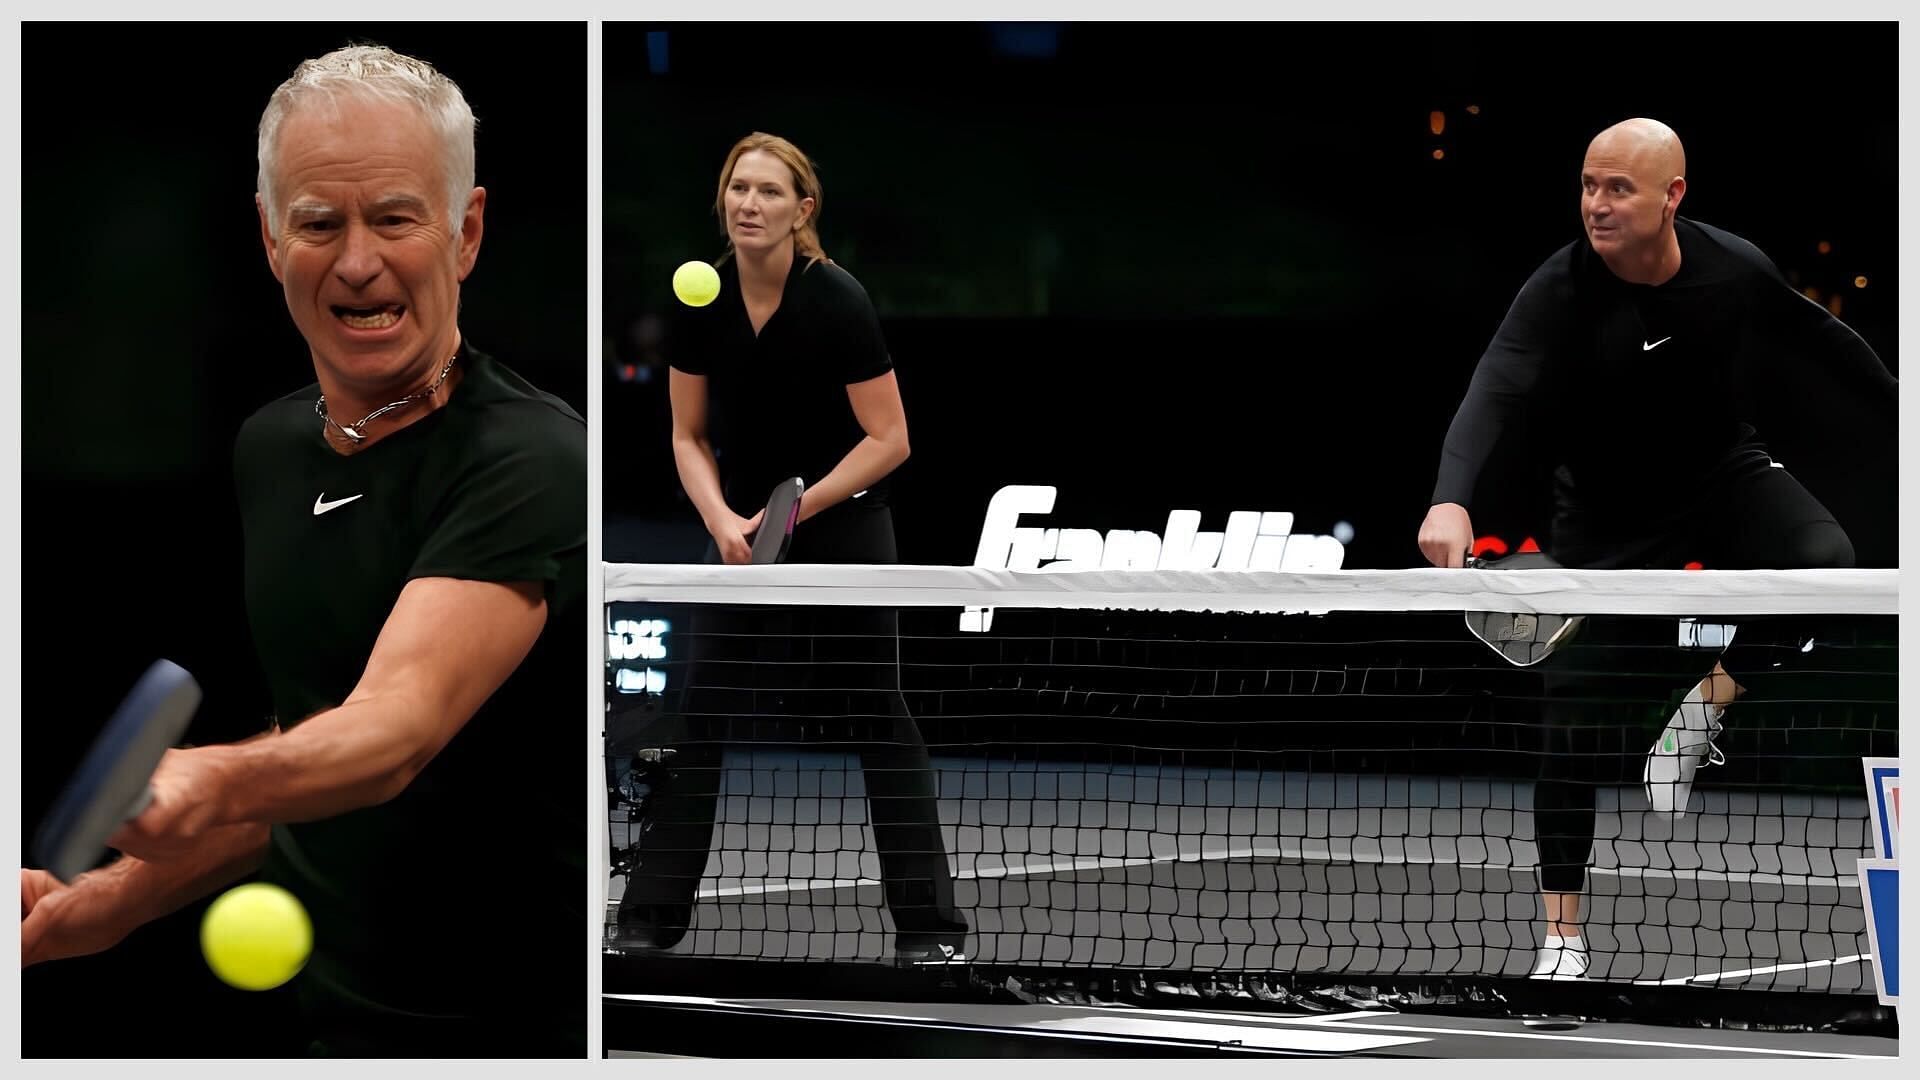 John McEnroe cheekily spoke about retiring from pickleball after losing to Steffi Graf and Andre Agassi